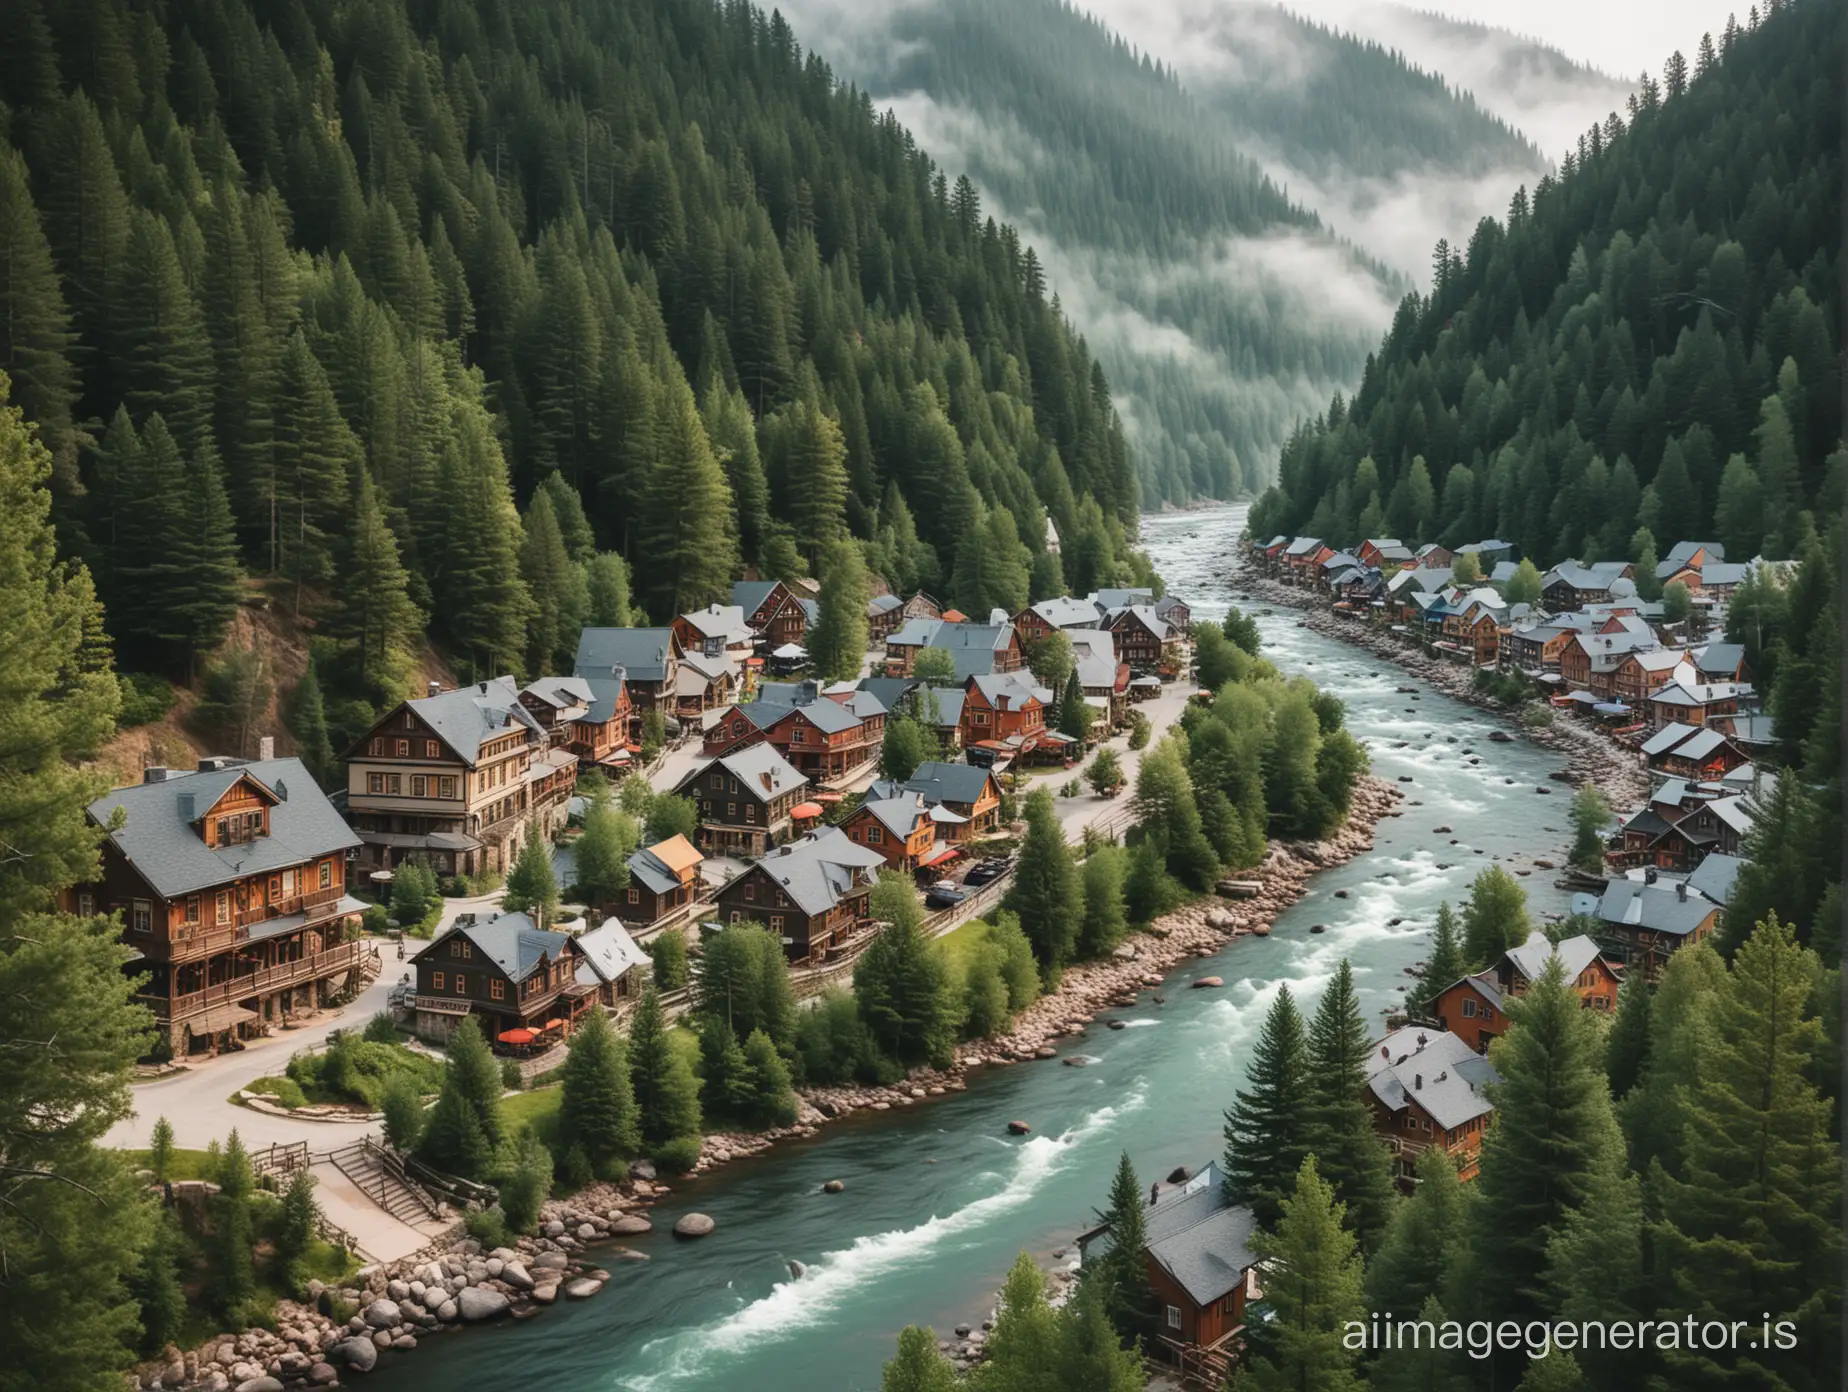 a cozy town surrounded by tall trees and winding rivers